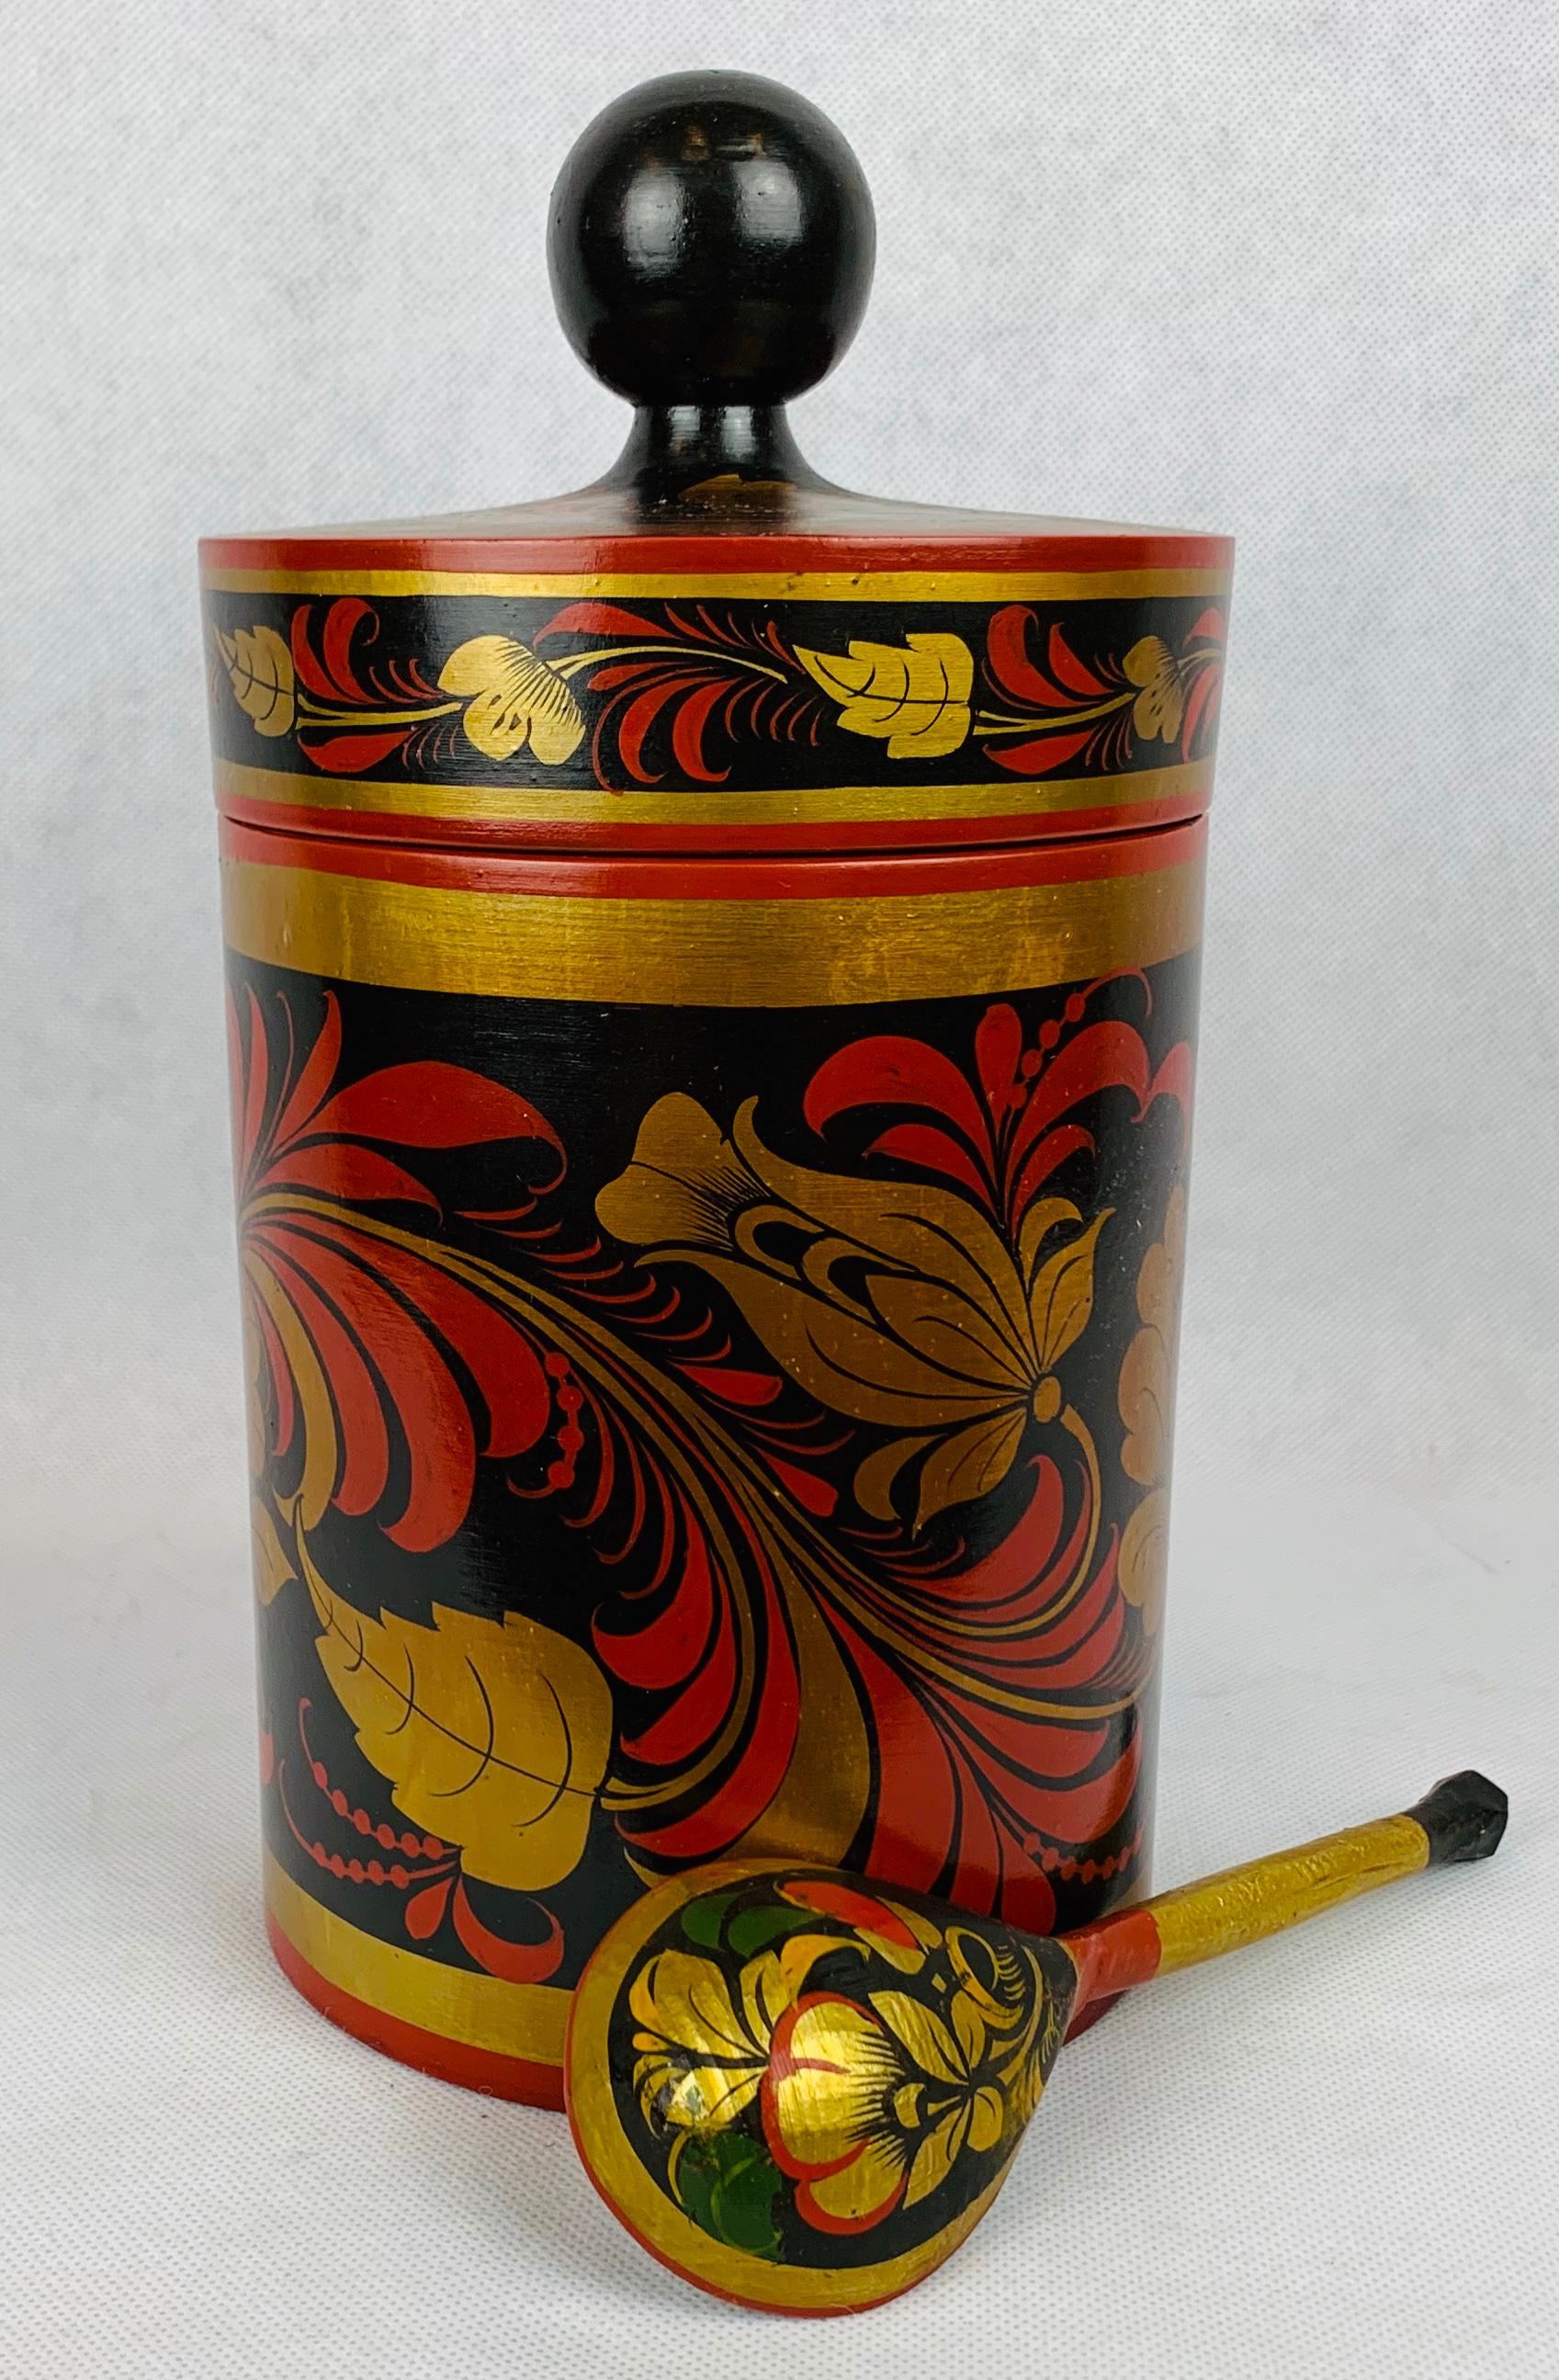 Russian lacquer tea canister with spoon made from solid Linden wood. Hand painted with lacquer in the traditional folk manner. If not used for tea why not use it for cookies or other food items. 

The original certificate of authenticity is included.